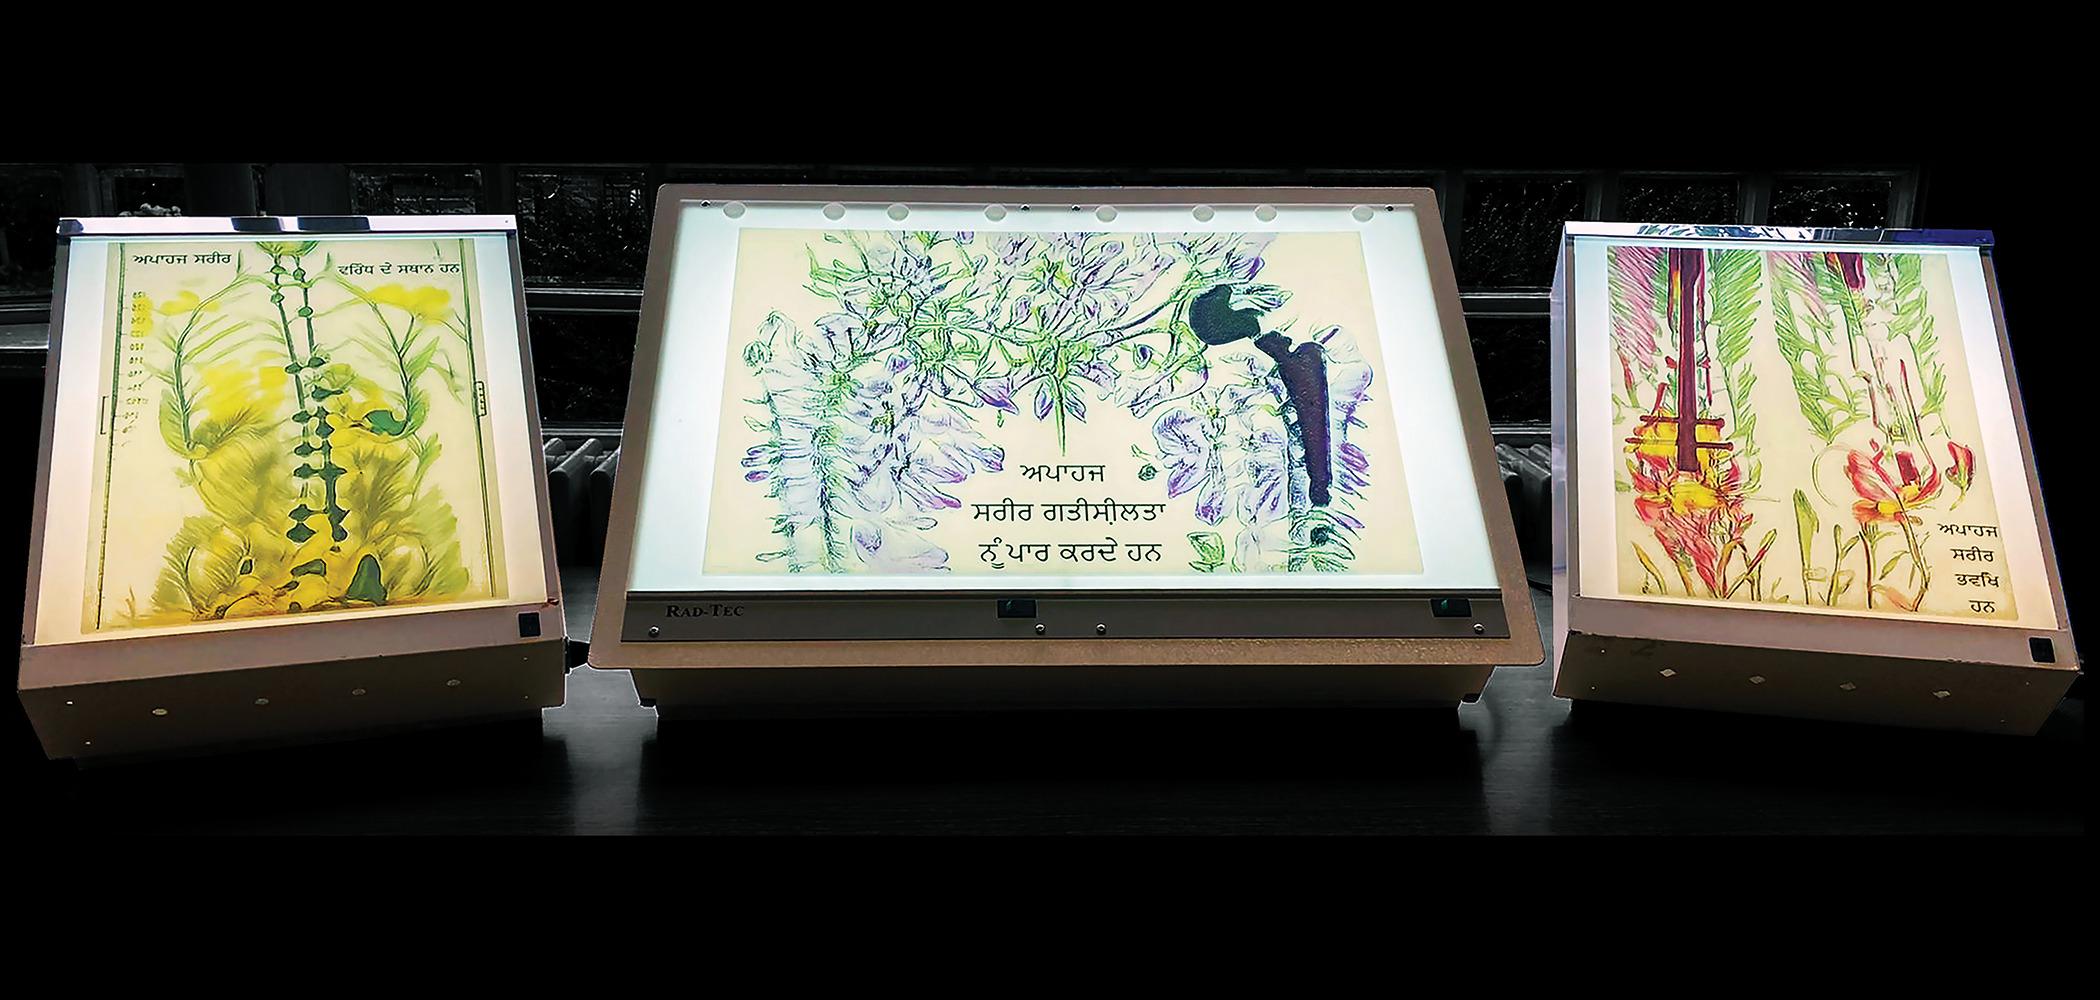 Three medical lightboxes exhibiting a colorful amalgam of X-rays with prostheses and botanical designs set against a monochrome background, each featuring Punjabi script celebrating the wholeness of disabled bodies.